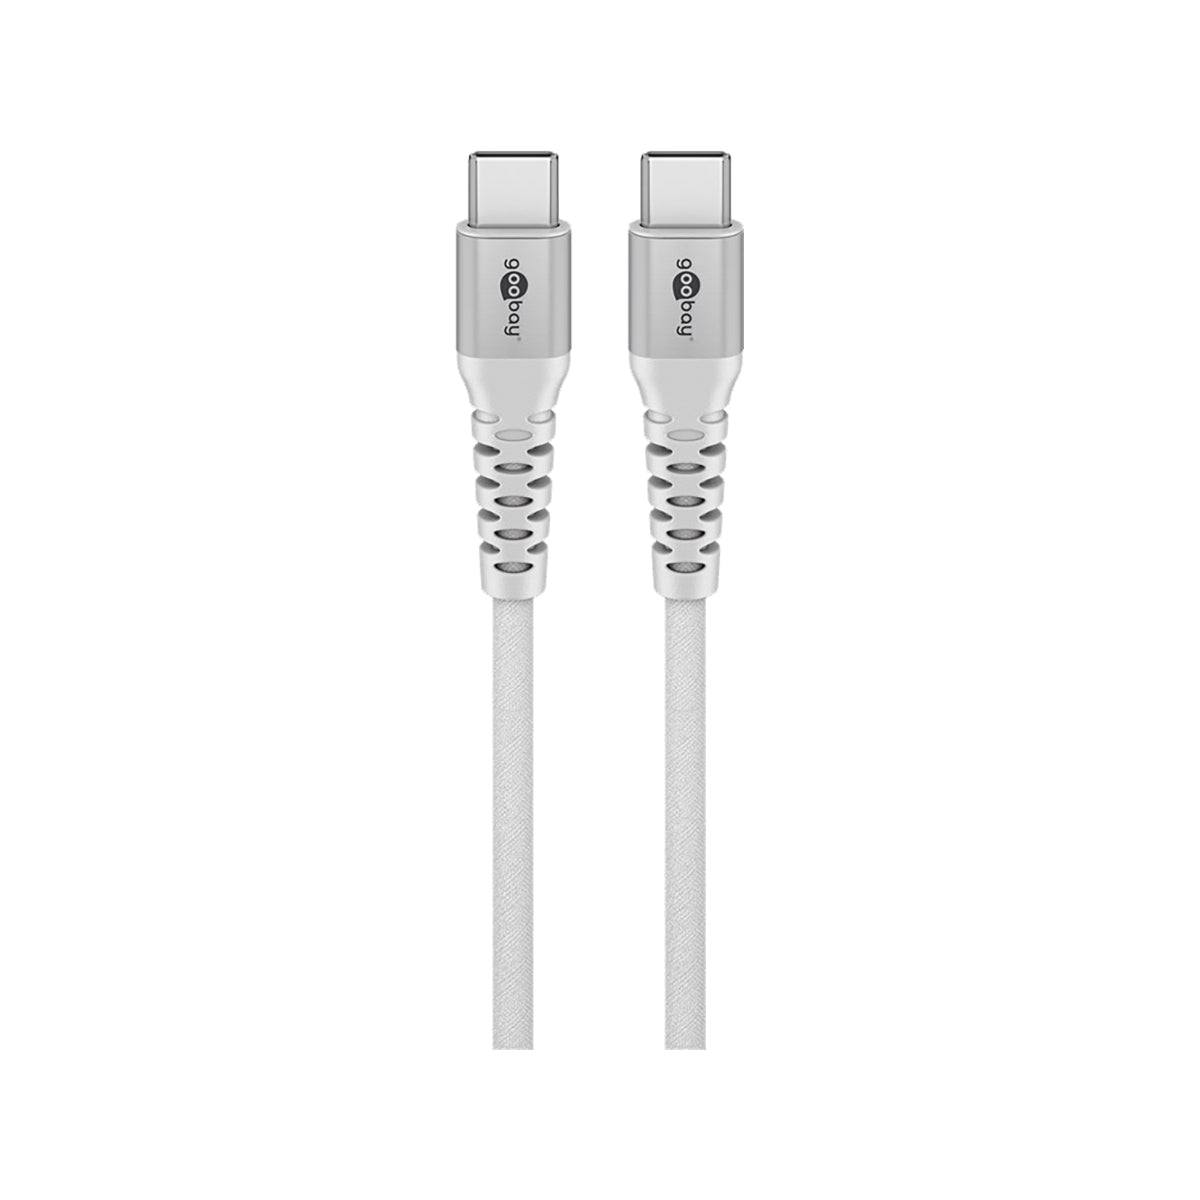 Goobay USB-C™ Supersoft Textile Cable with Metal Plugs 1 m for Smartphone/Tablets/Laptops - White